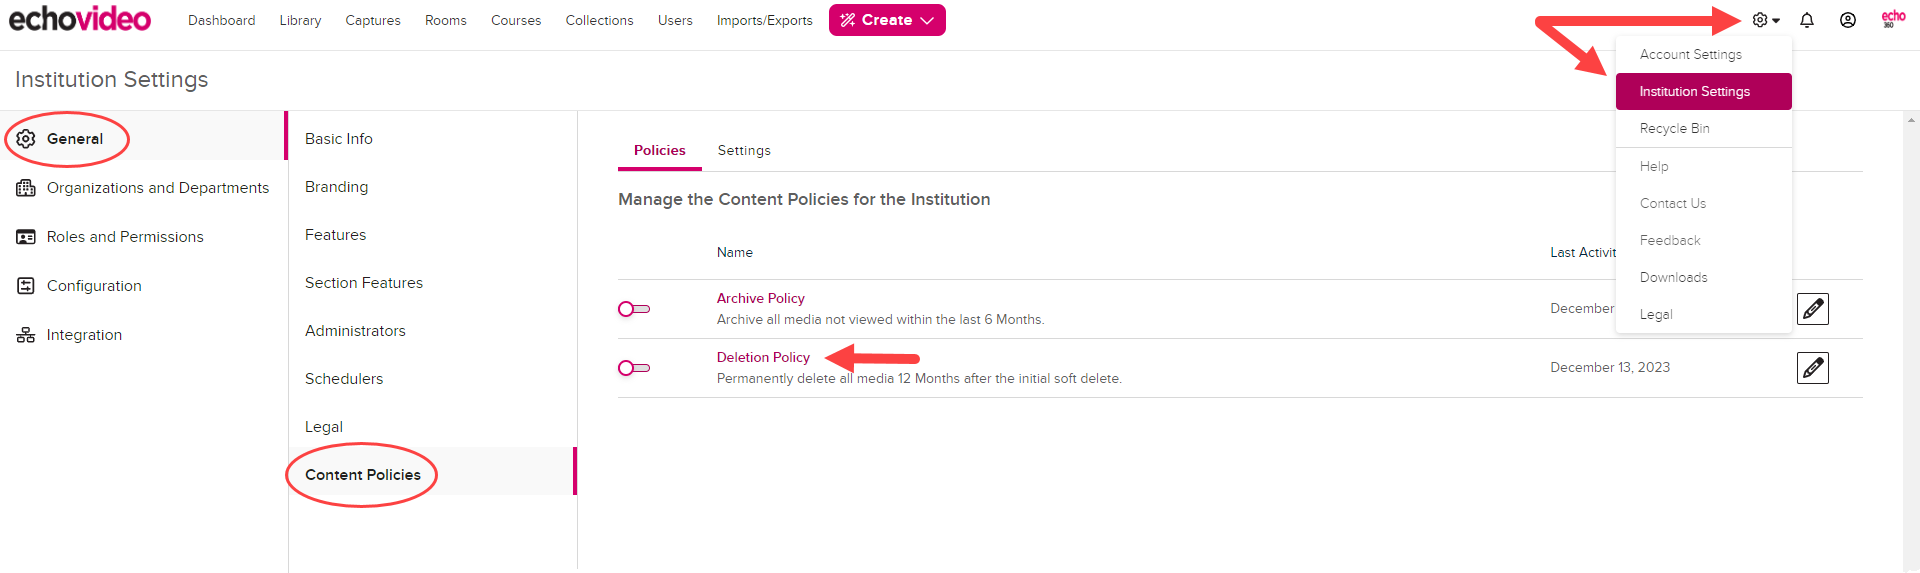 Institution Settings open to Content Policies with Deletion toggle disabled as shown by the steps described